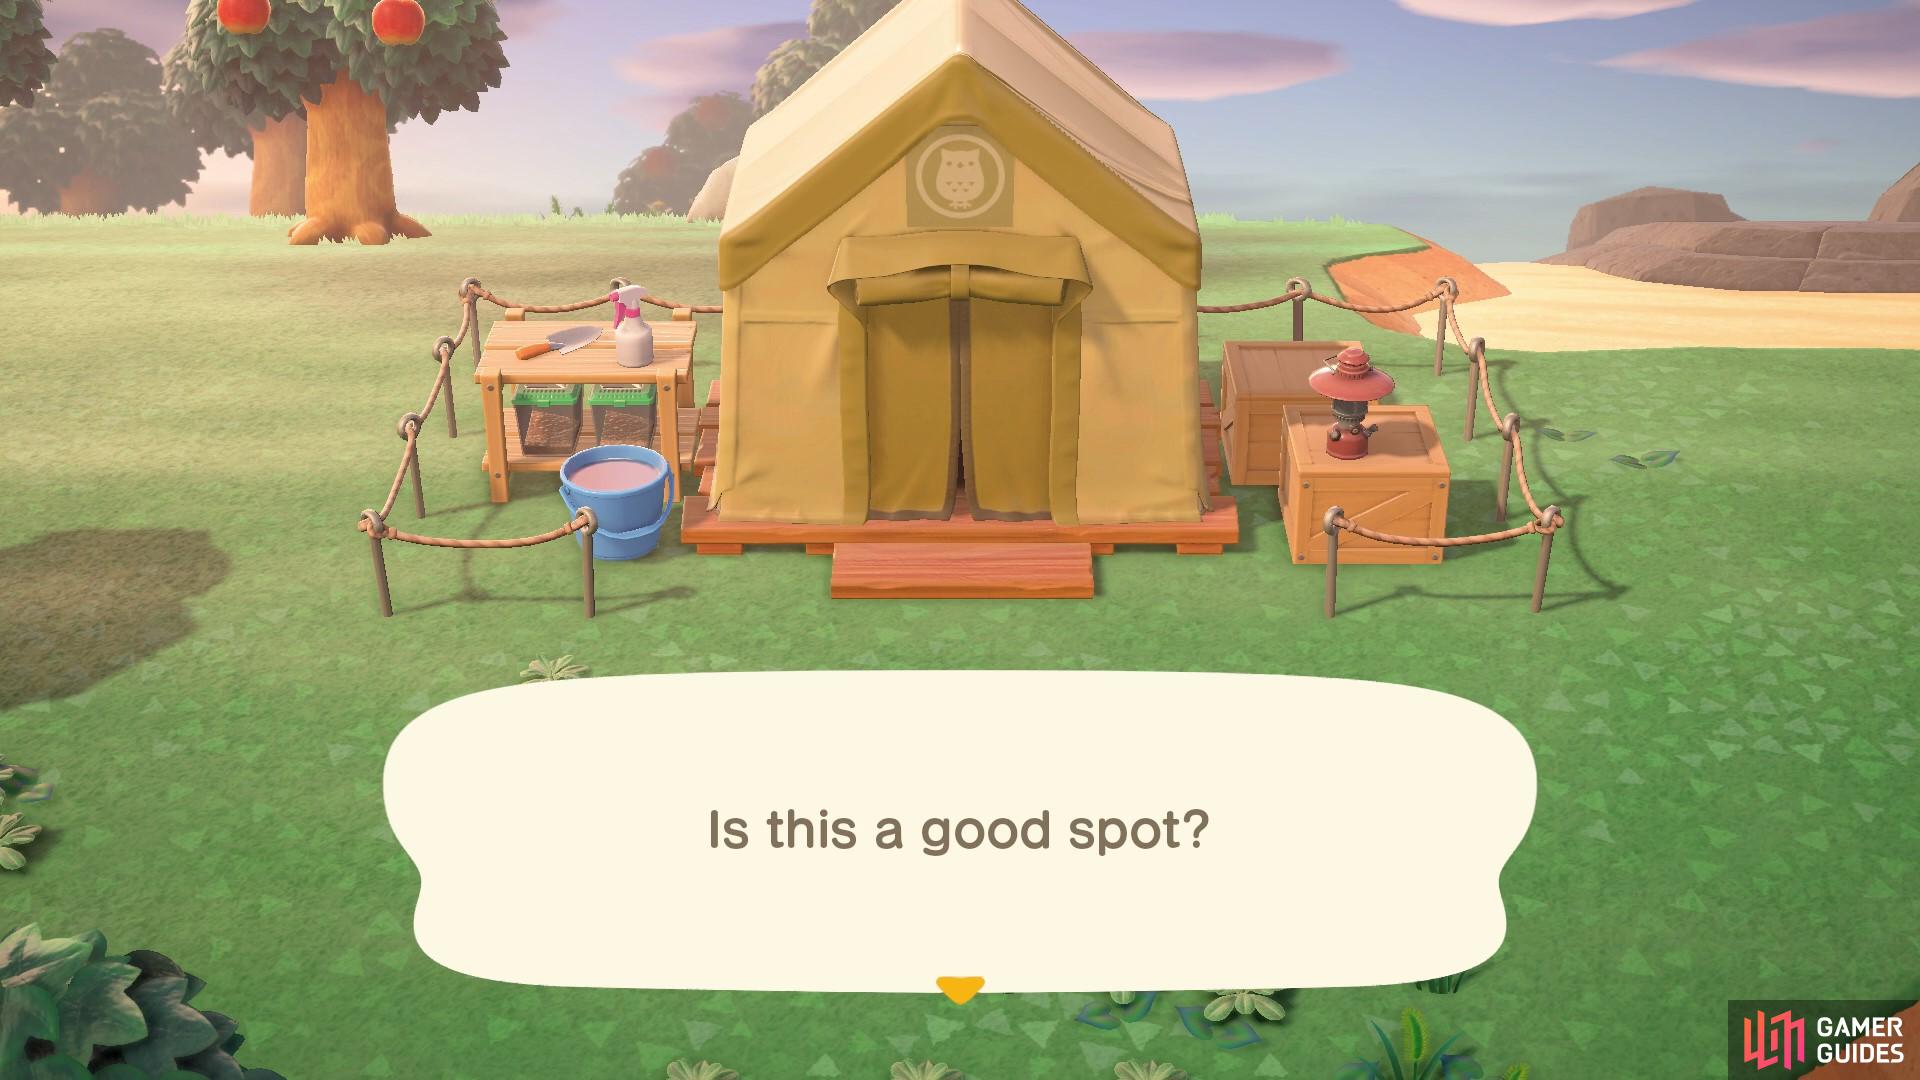 You can pitch Blathers’ tent wherever you like!